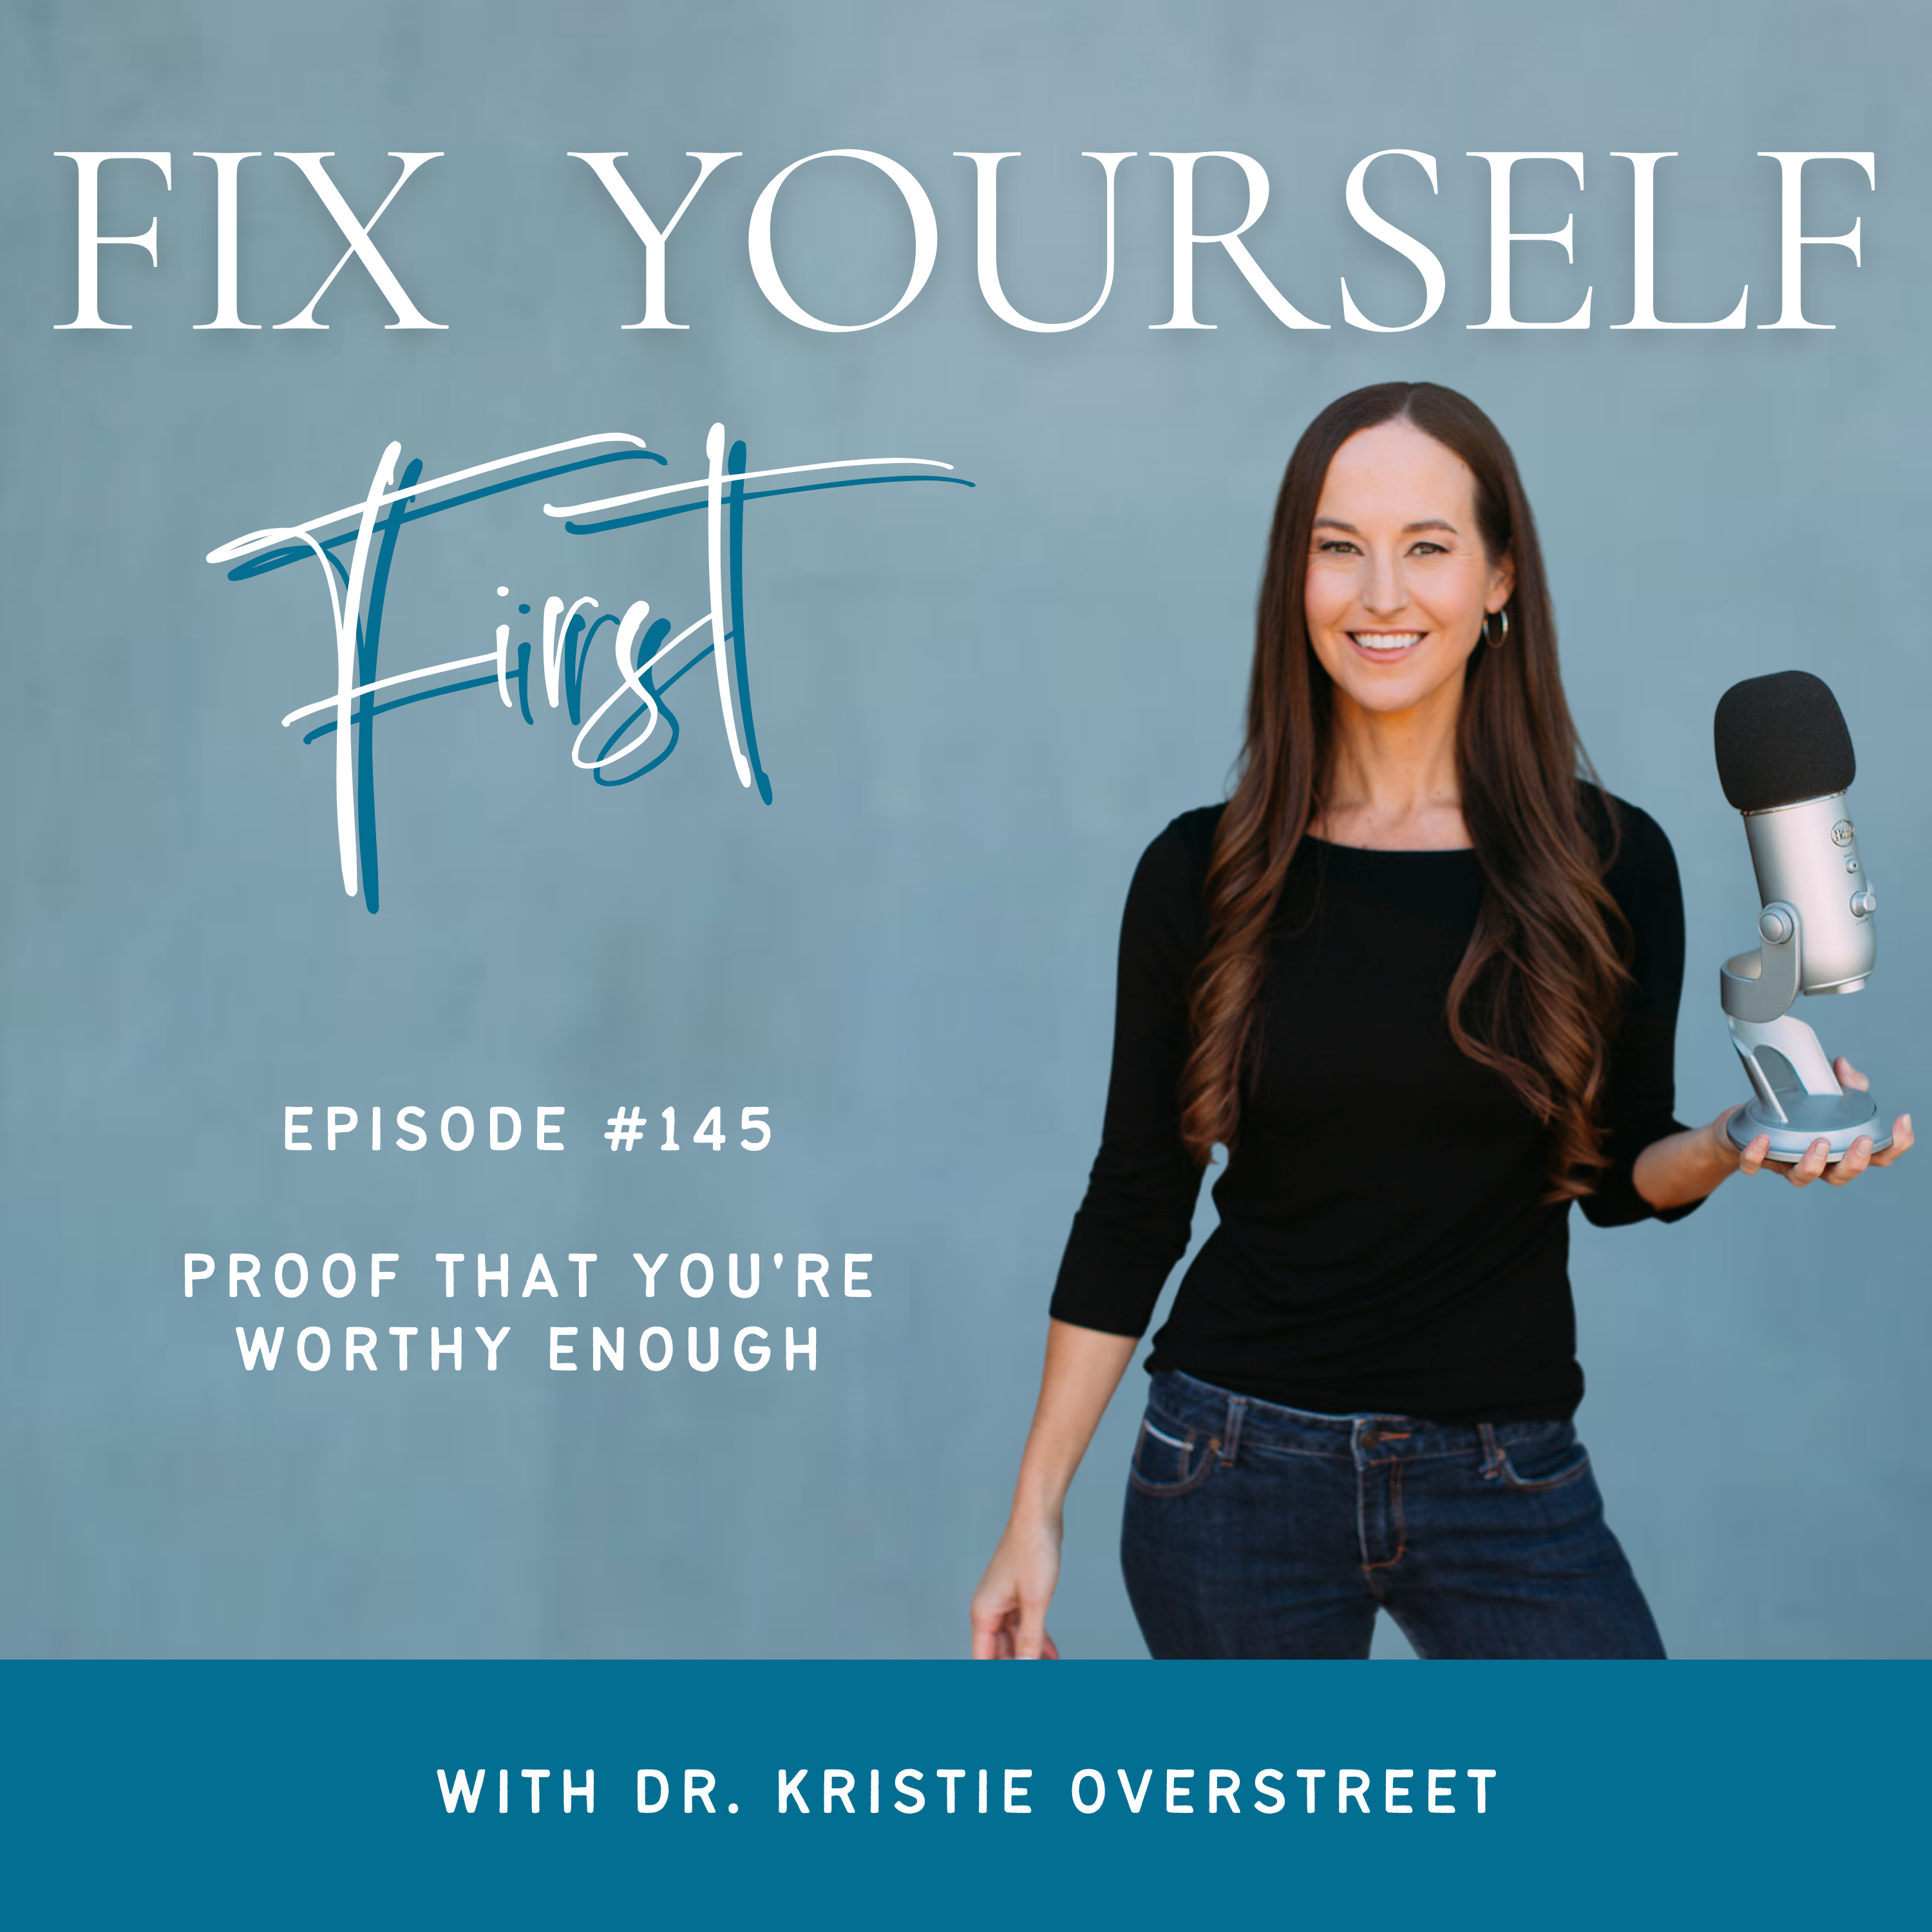 Fix Yourself First Episode 145 Proof That You're Worth Enough